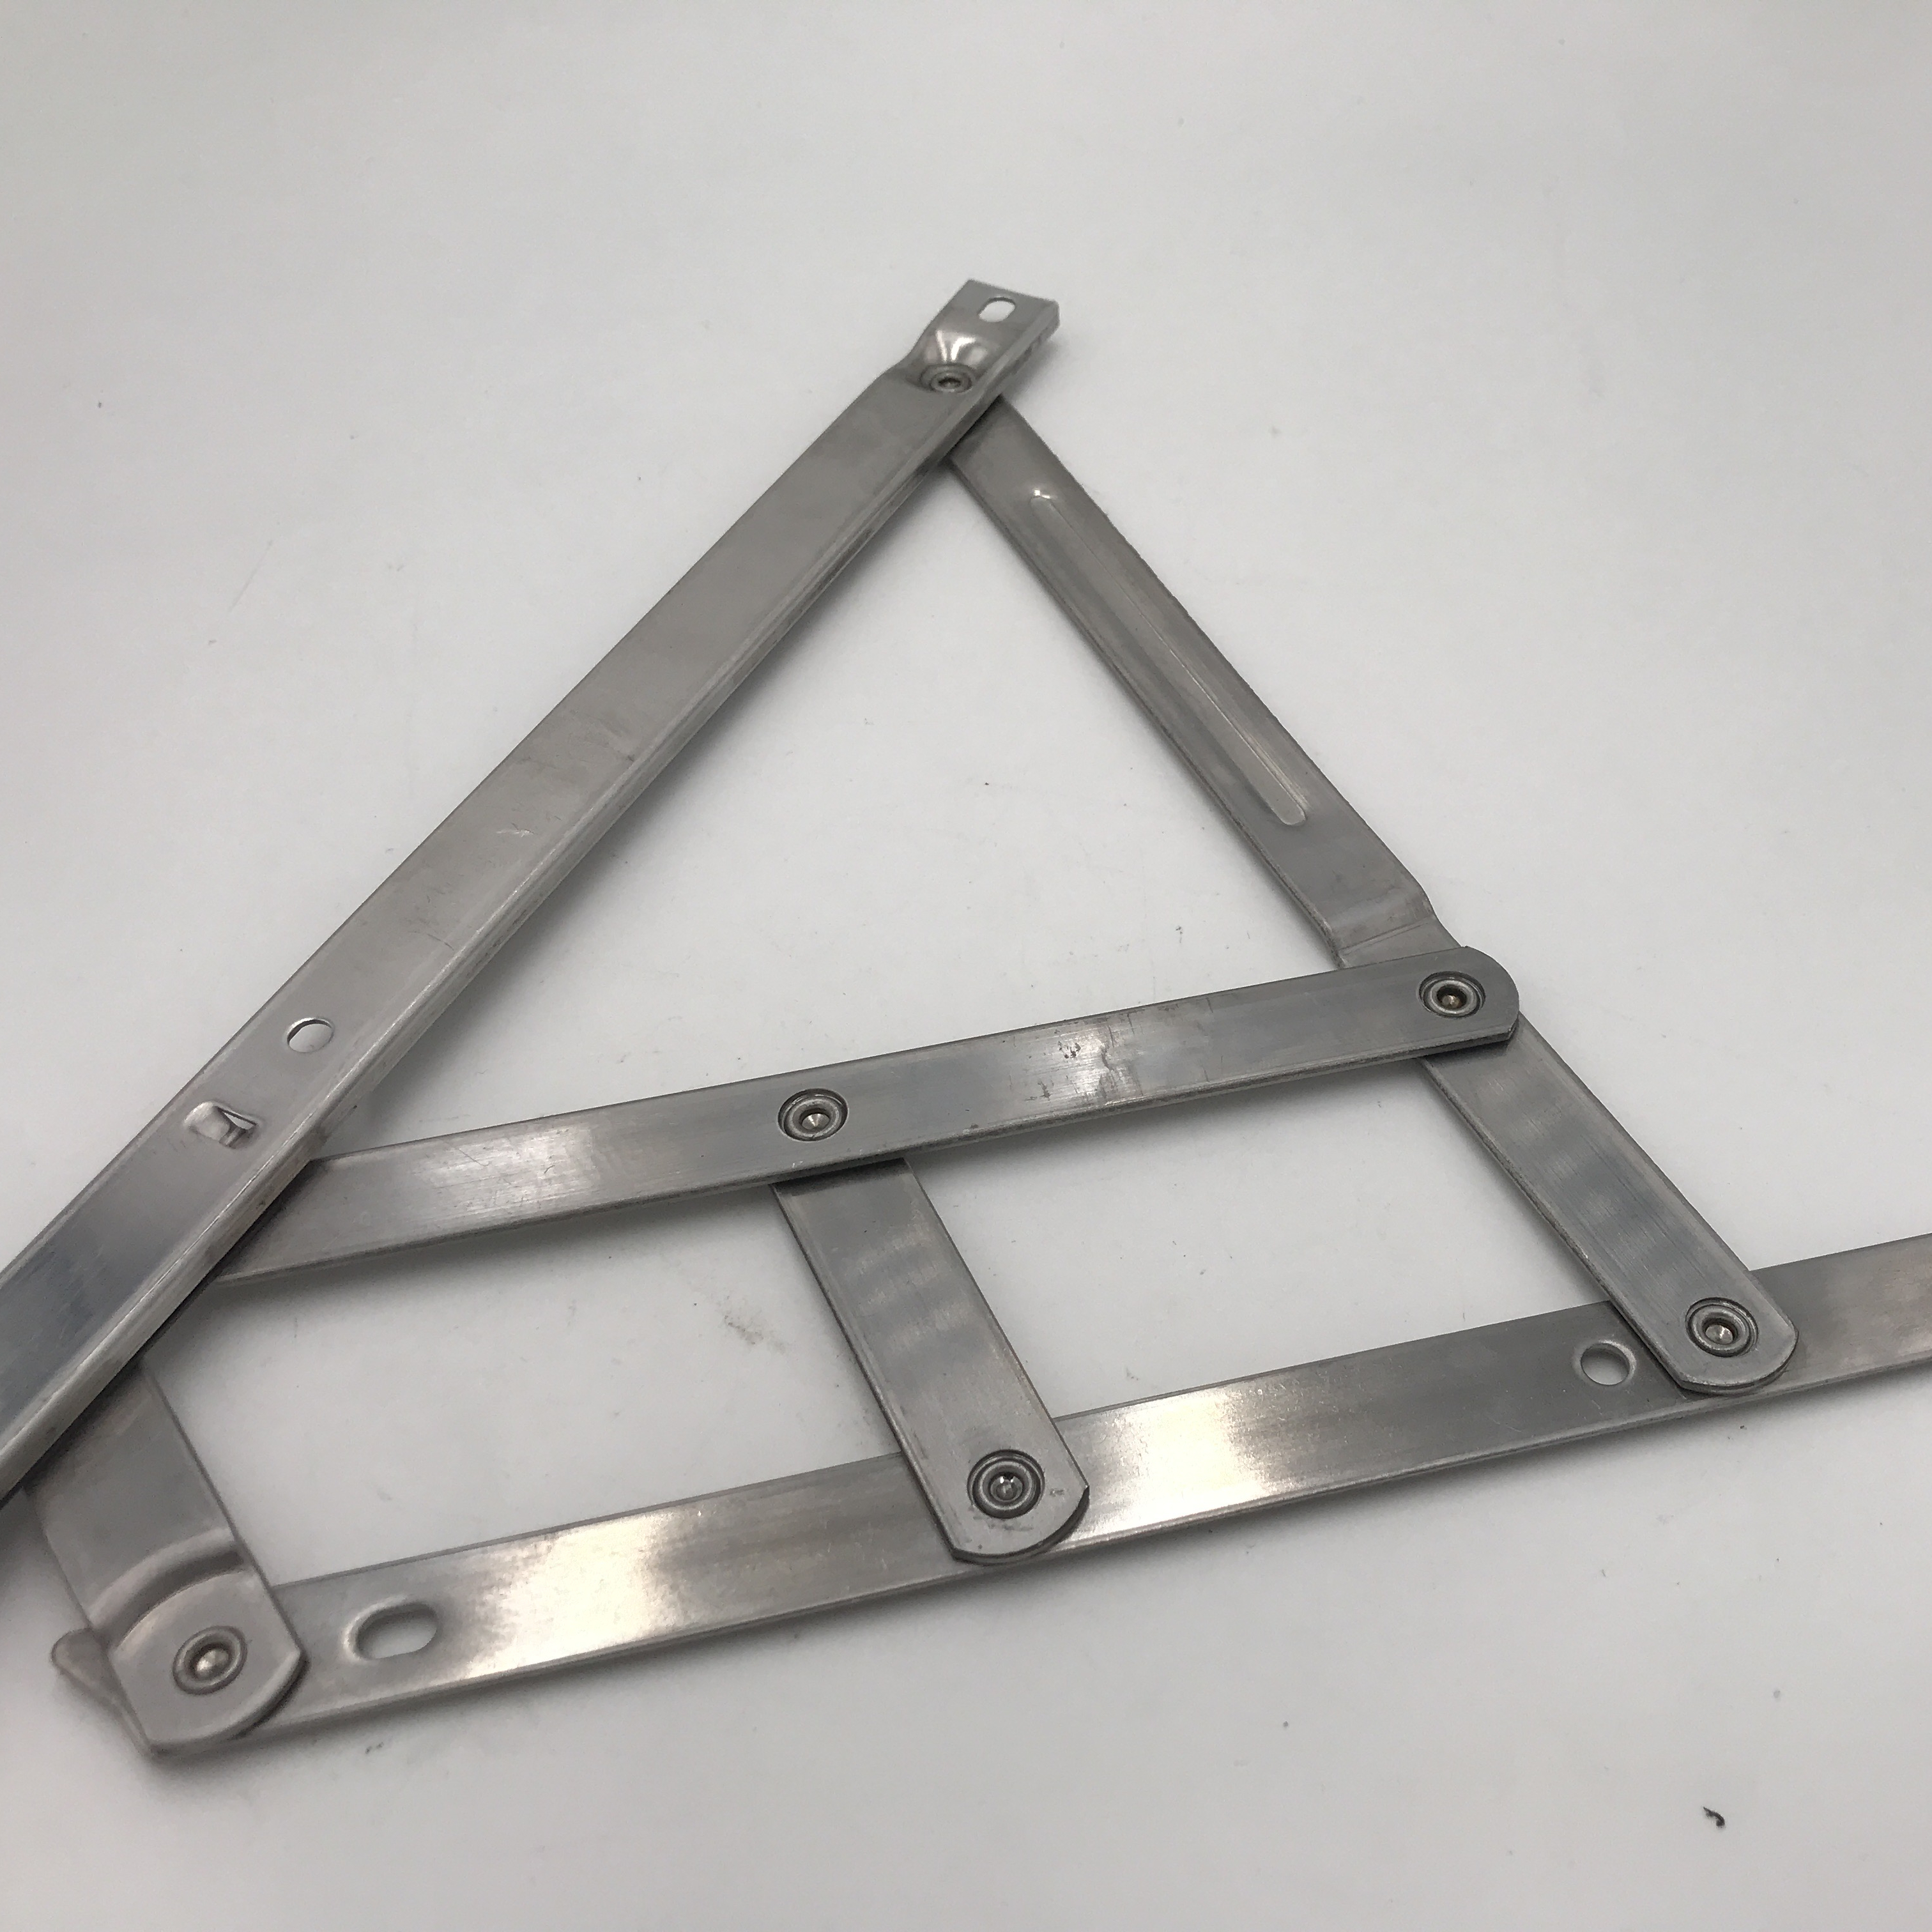 wholesale friction stay friction metal tin friction casement aluminium profiles stainless steel window hinges